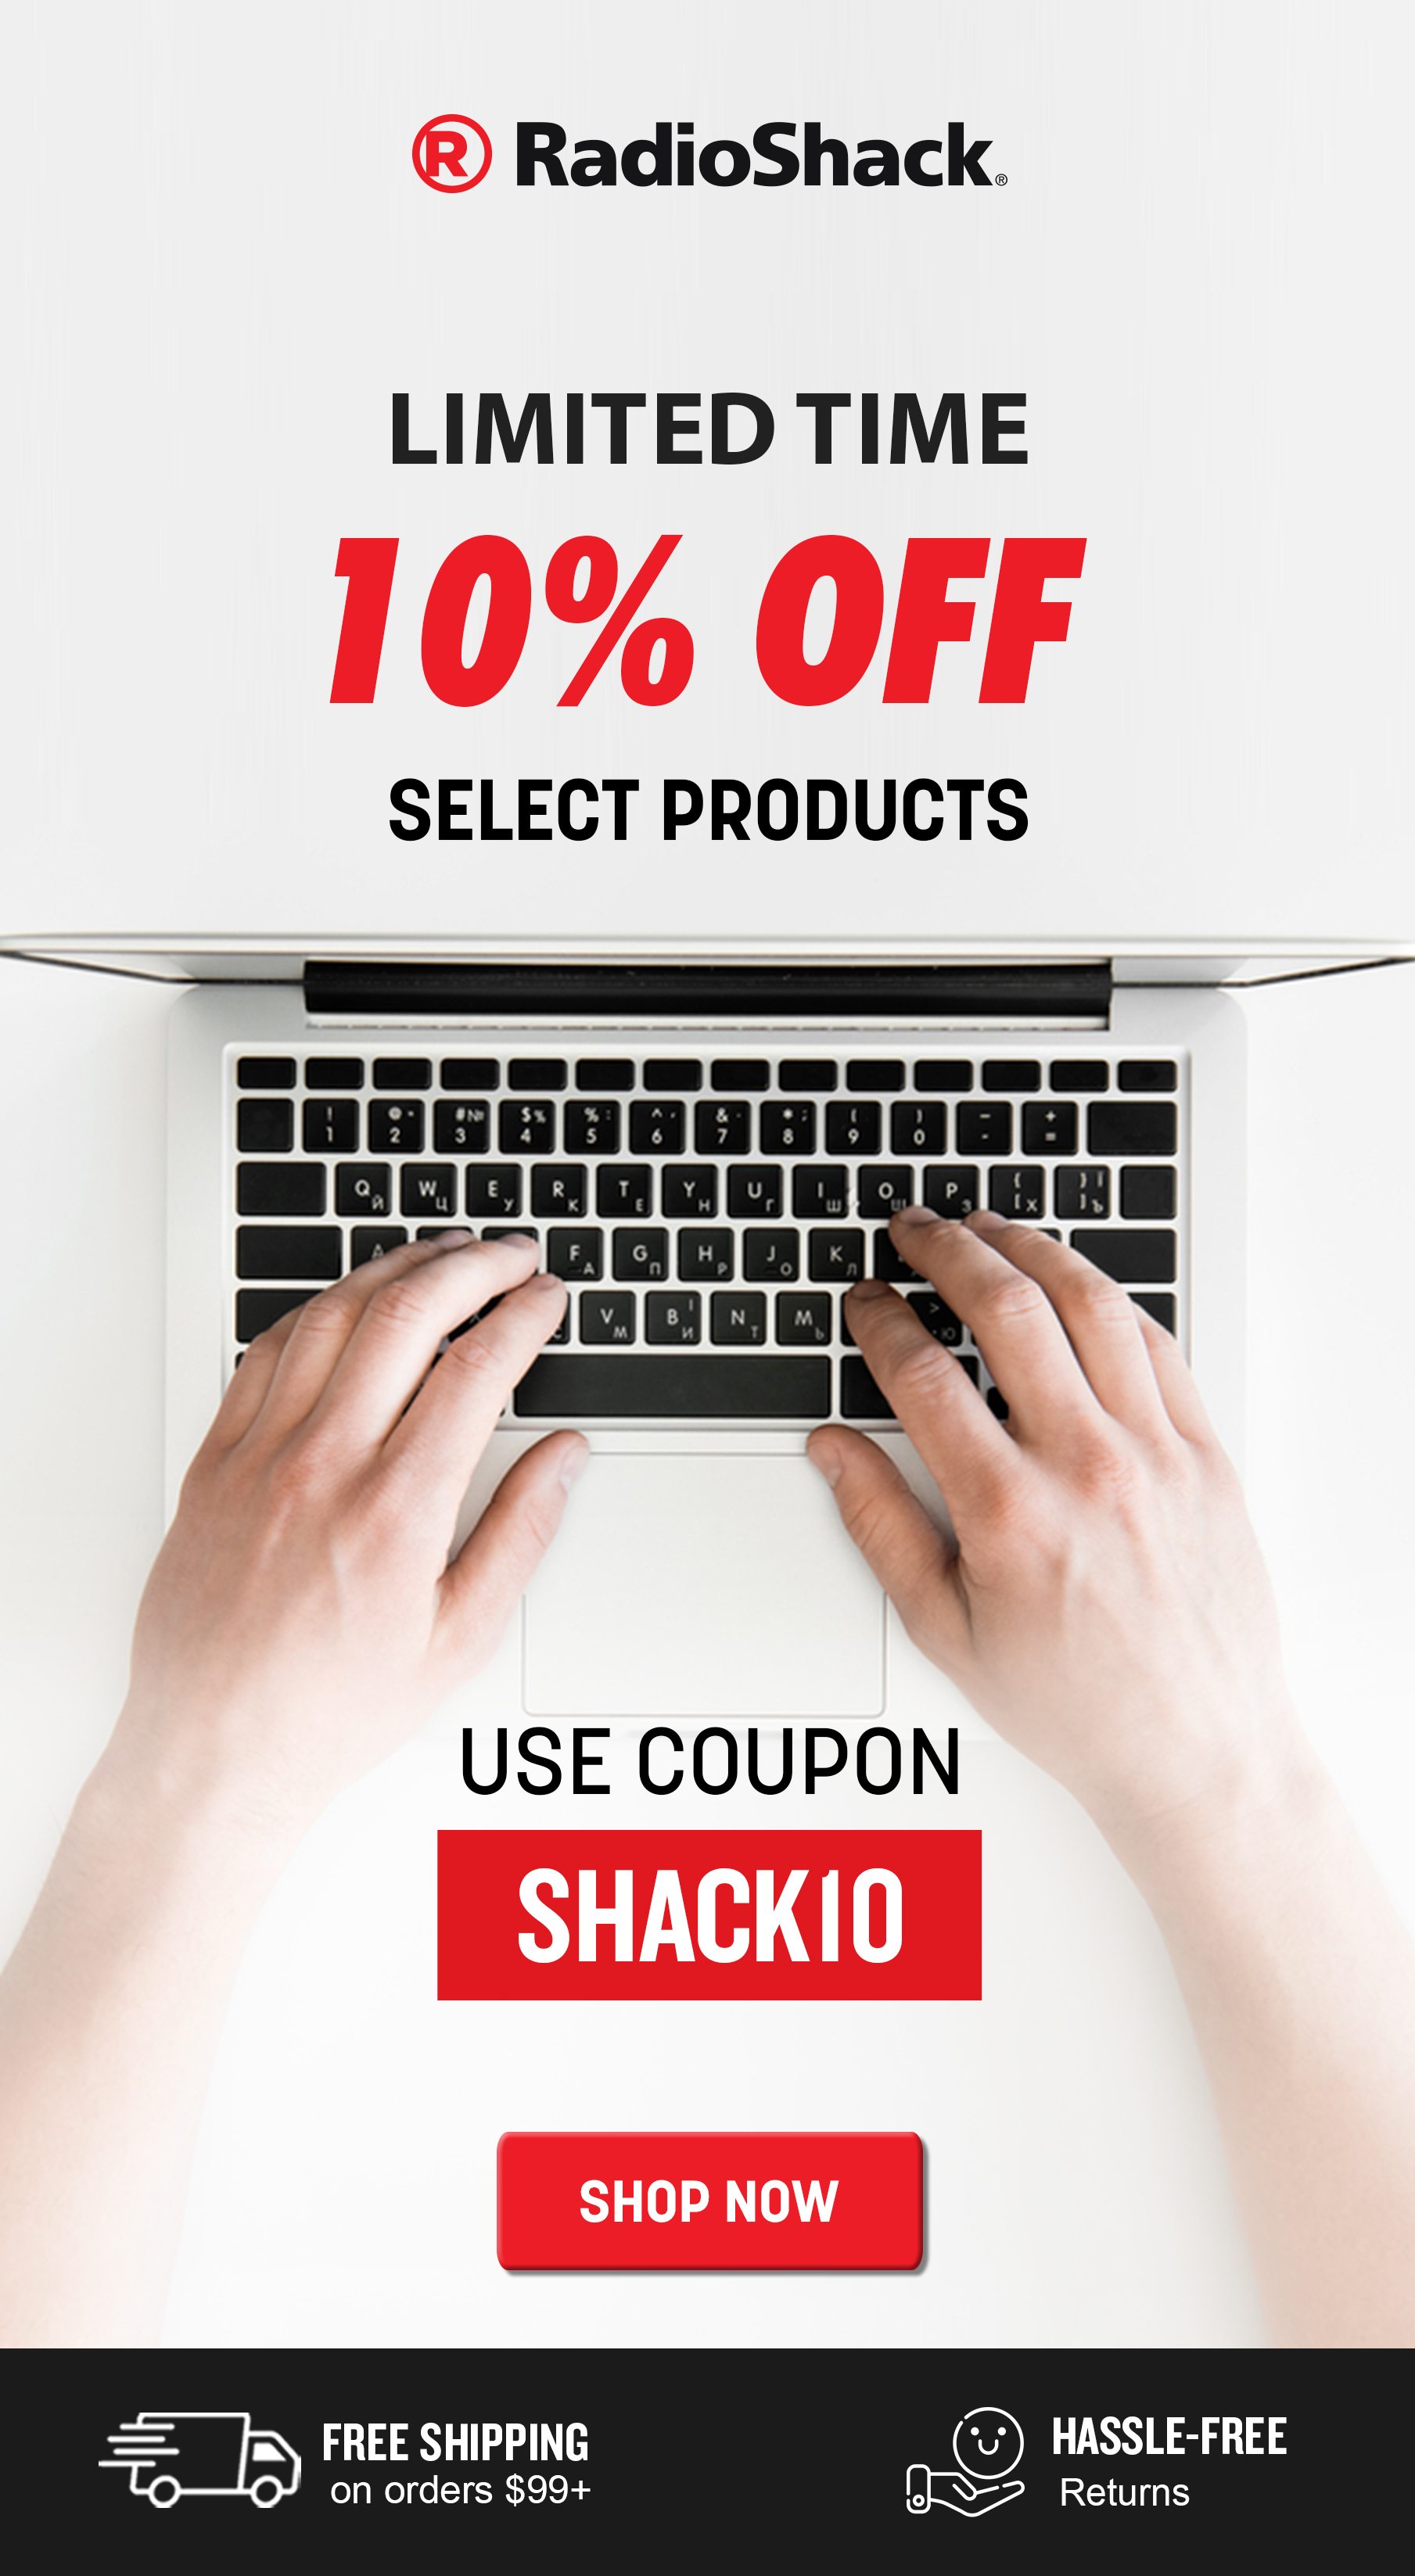 10% OFF SELECT PRODUCTS